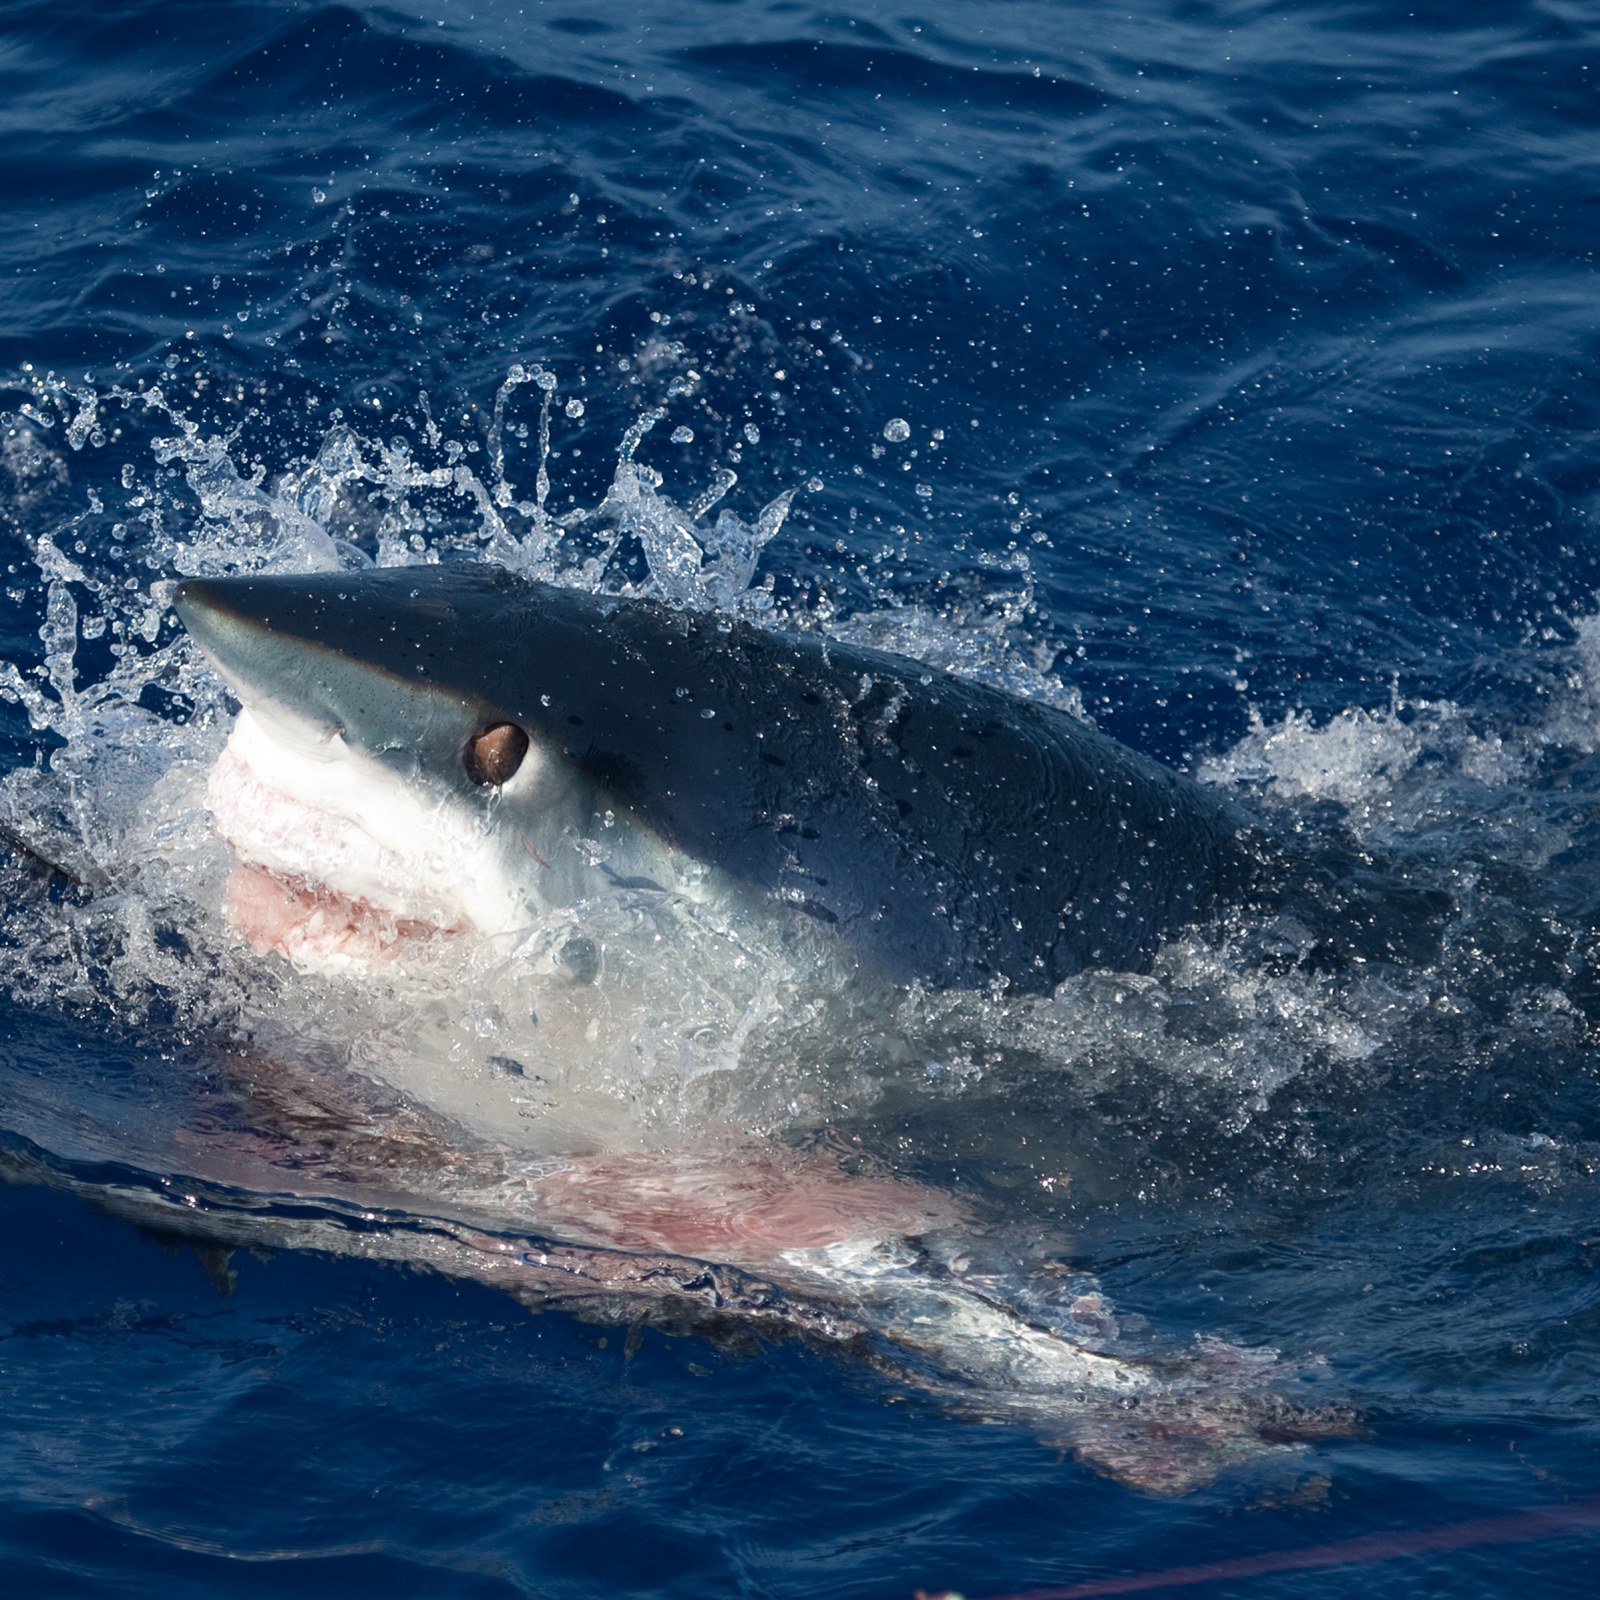 Most Powerful Shark Bite Ever Recorded Measured by Scientists